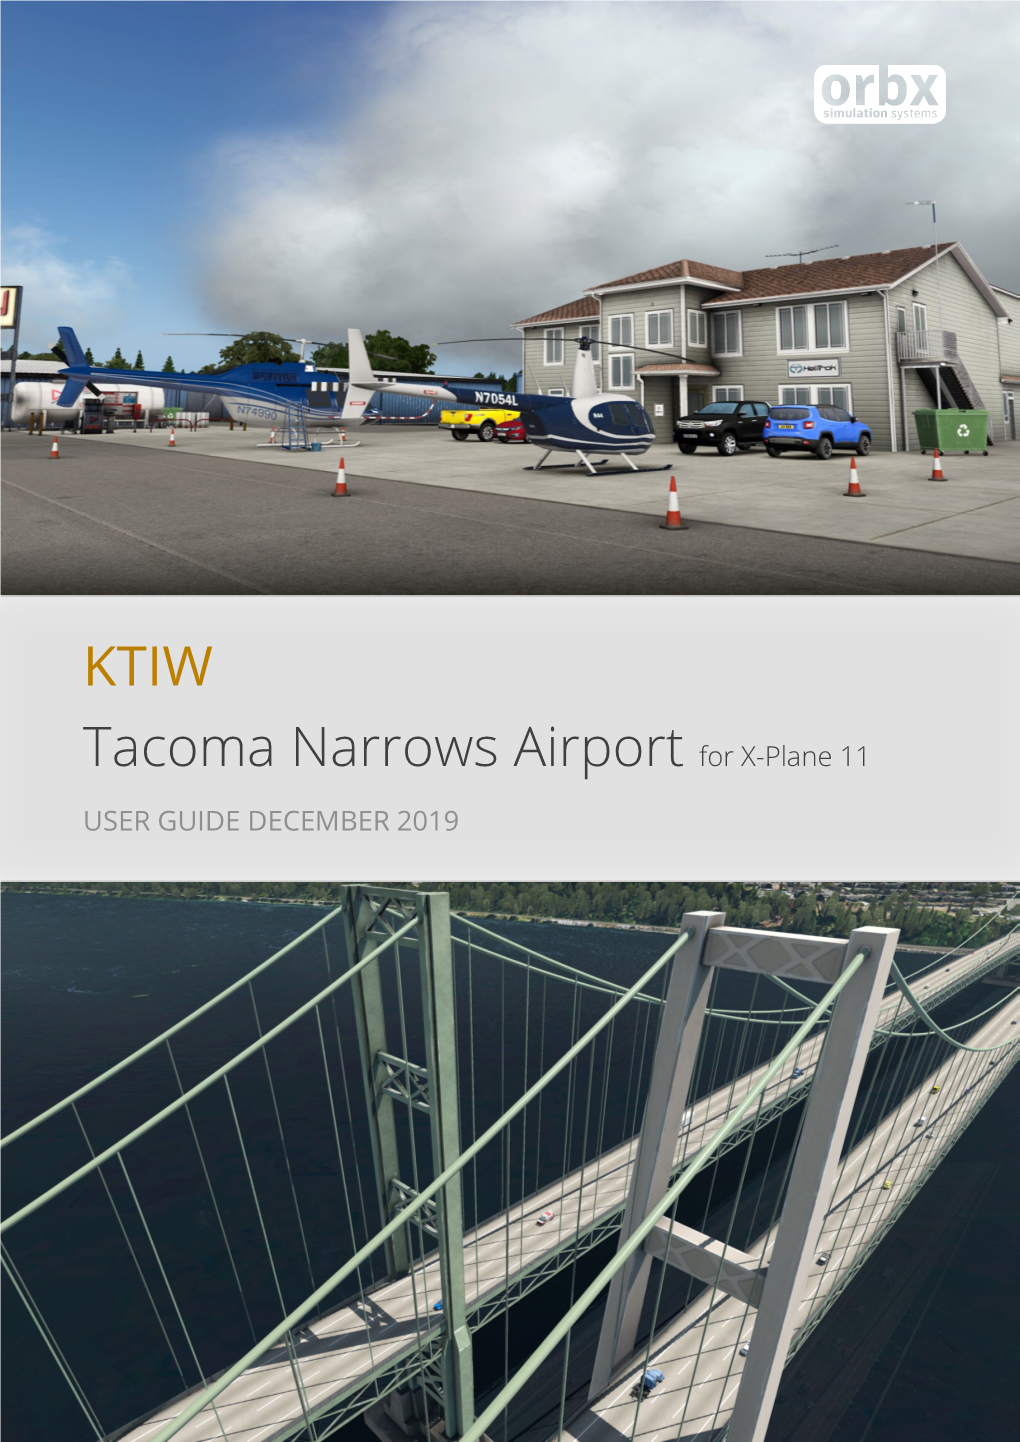 KTIW Tacoma Narrows Airport for X-Plane 11